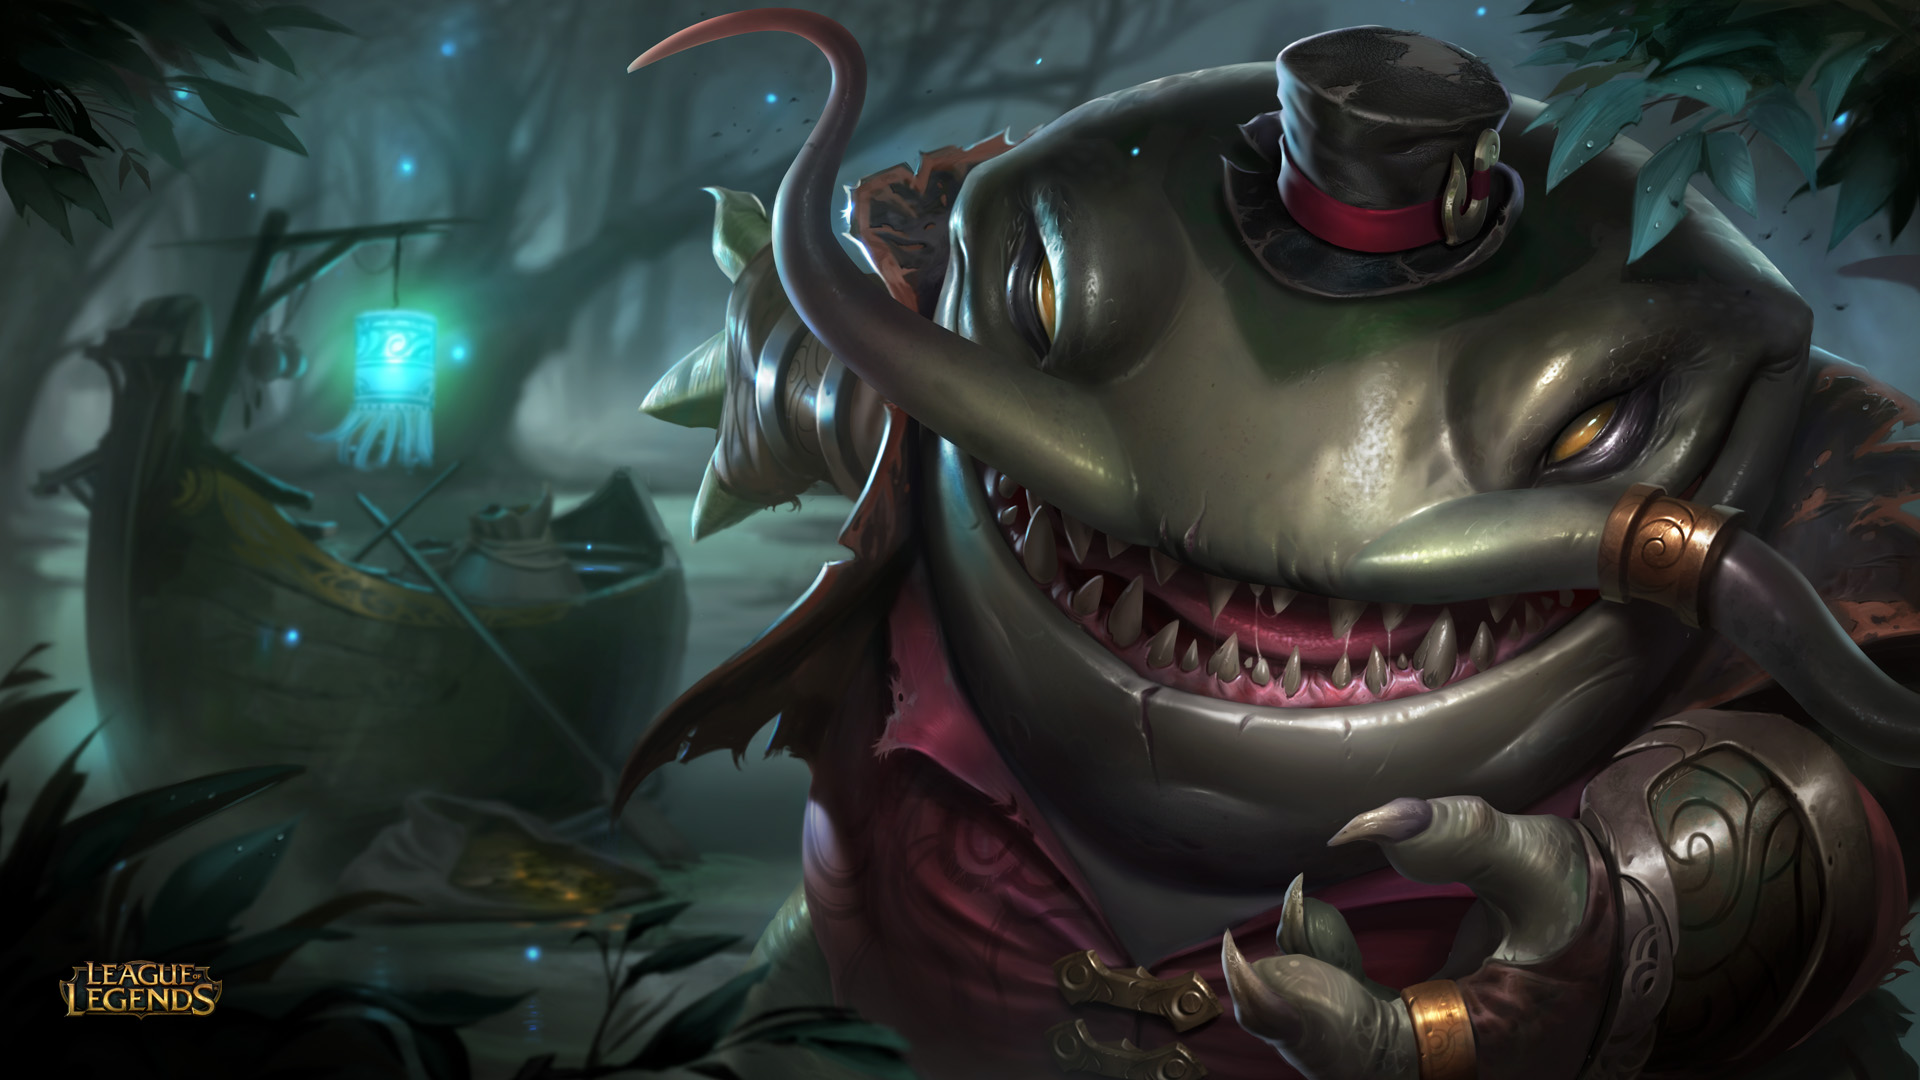 https://img-cdn.2game.vn/pictures/images/2015/6/24/lmht-tahm-kench-xemgame-10.jpg